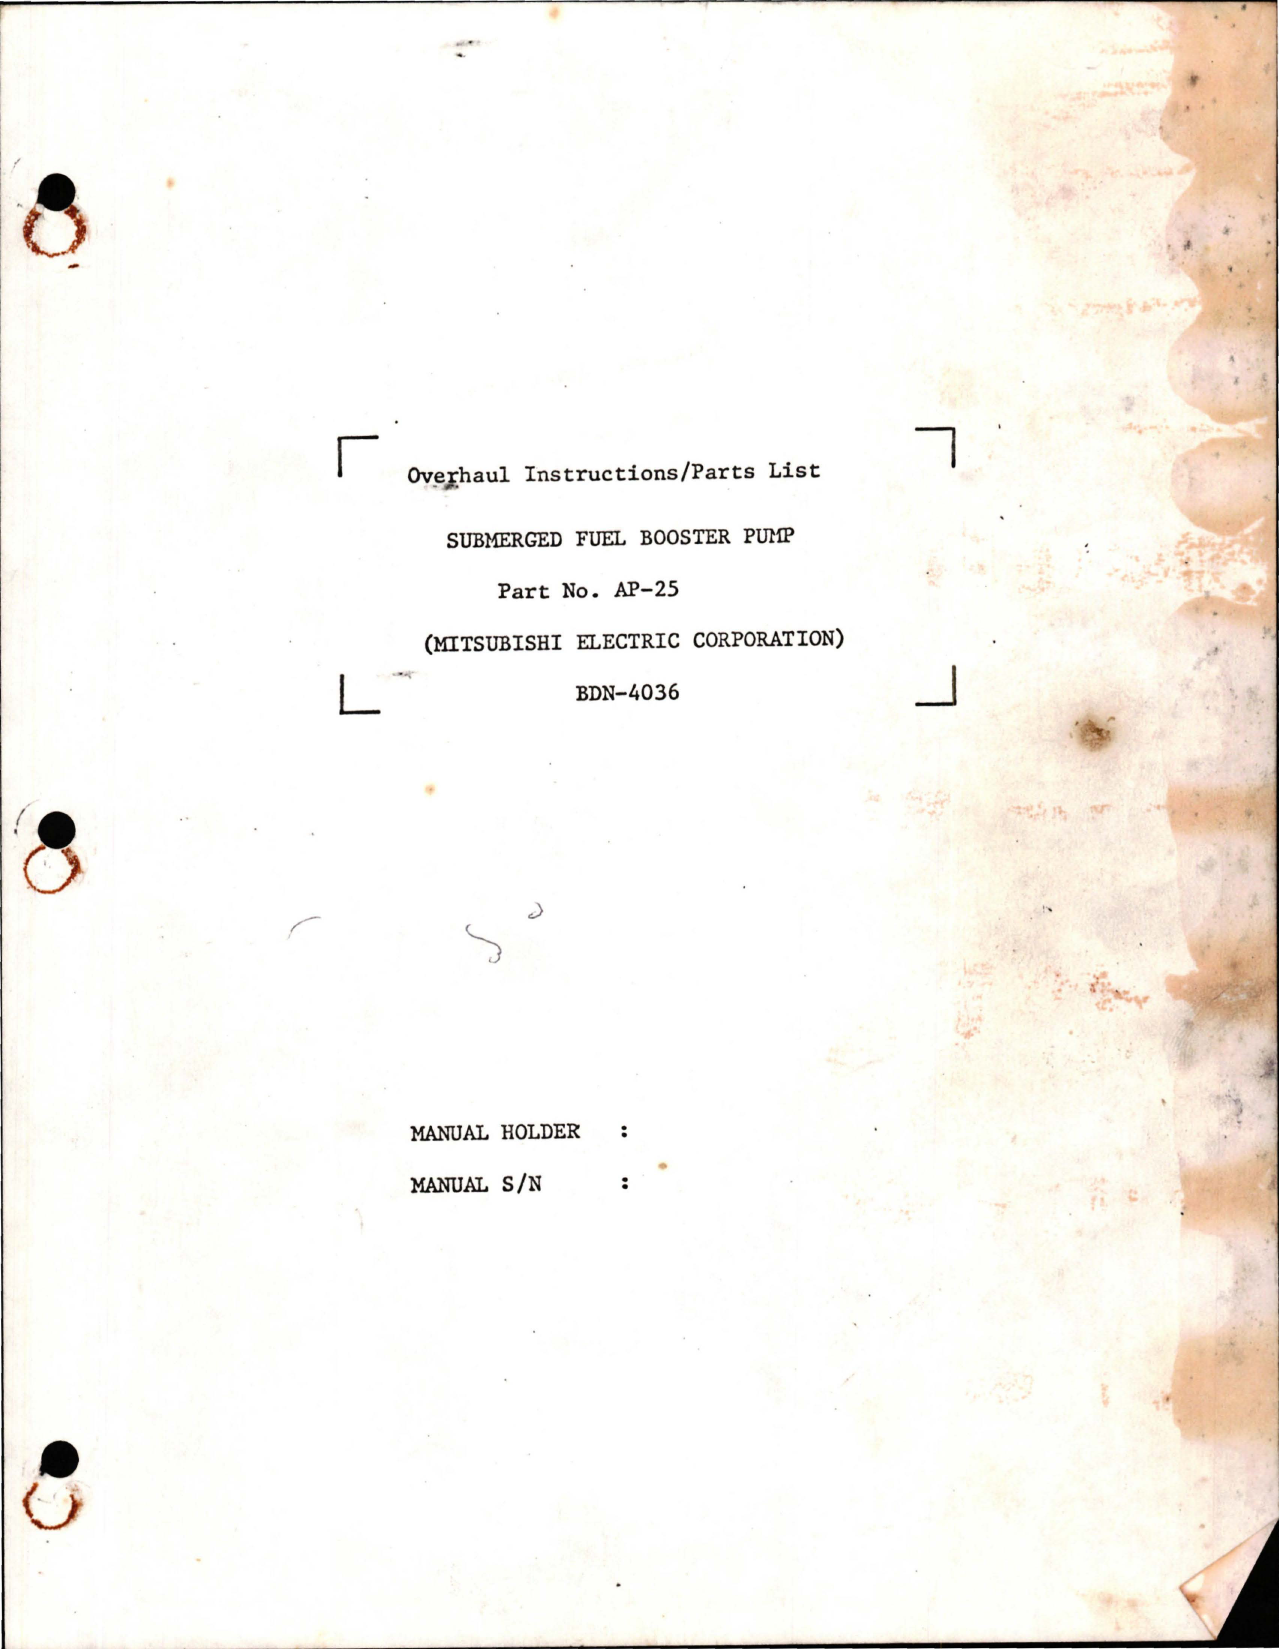 Sample page 1 from AirCorps Library document: Overhaul Instructions with Parts List for Submerged Fuel Booster Pump - Part AP-25